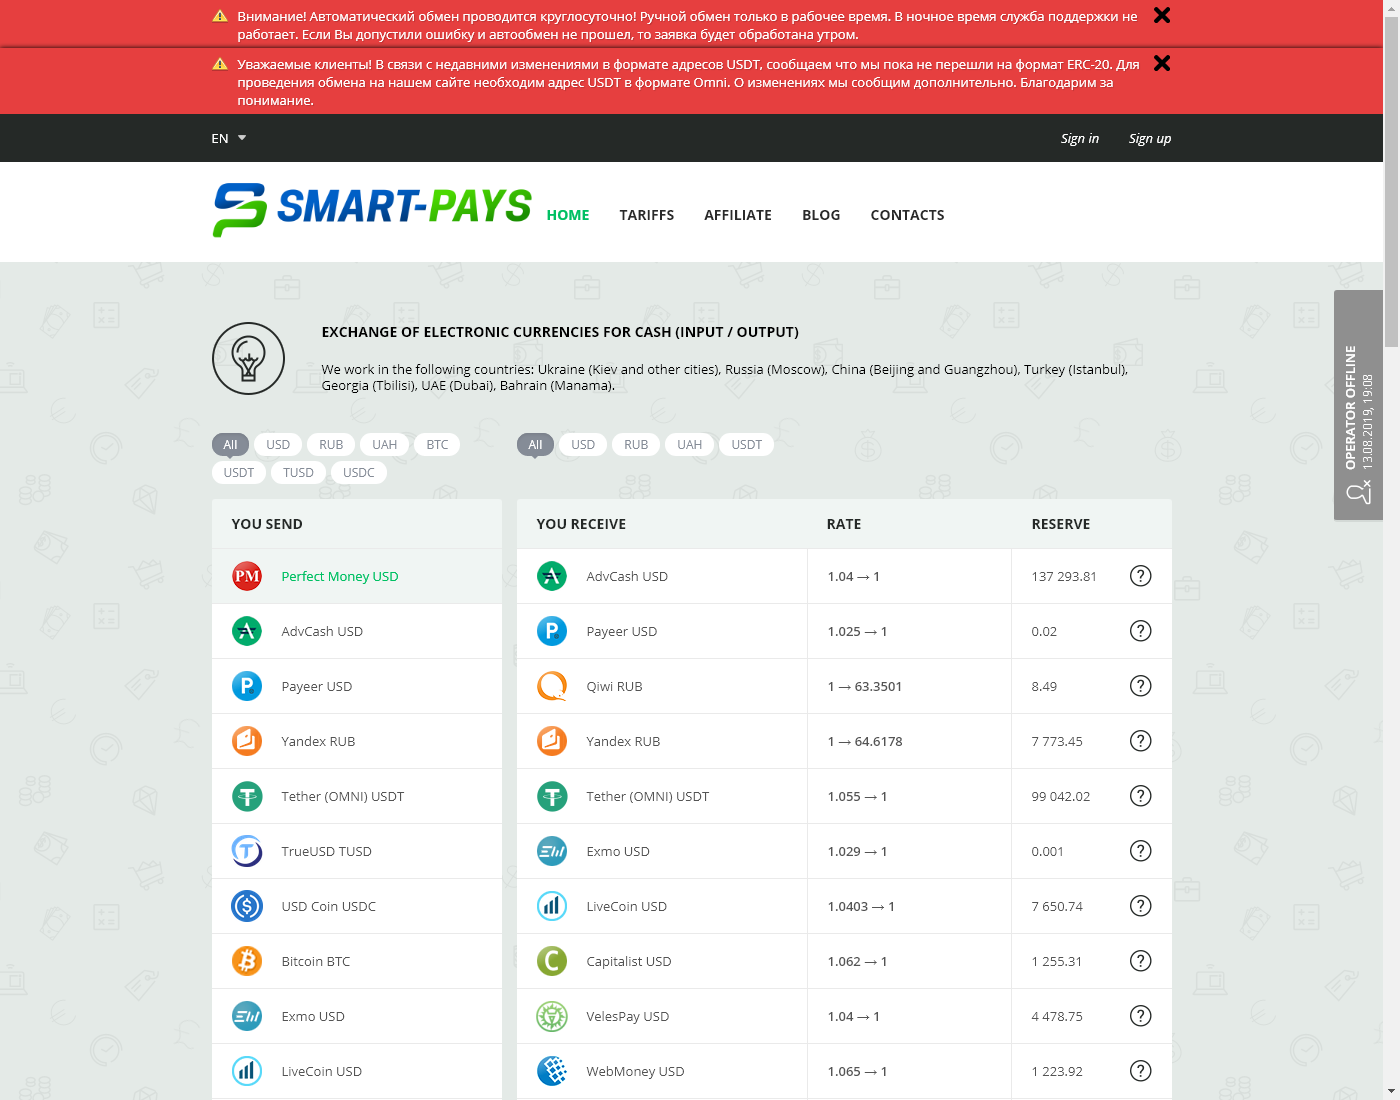 Smart-Pays user interface: the home page in English